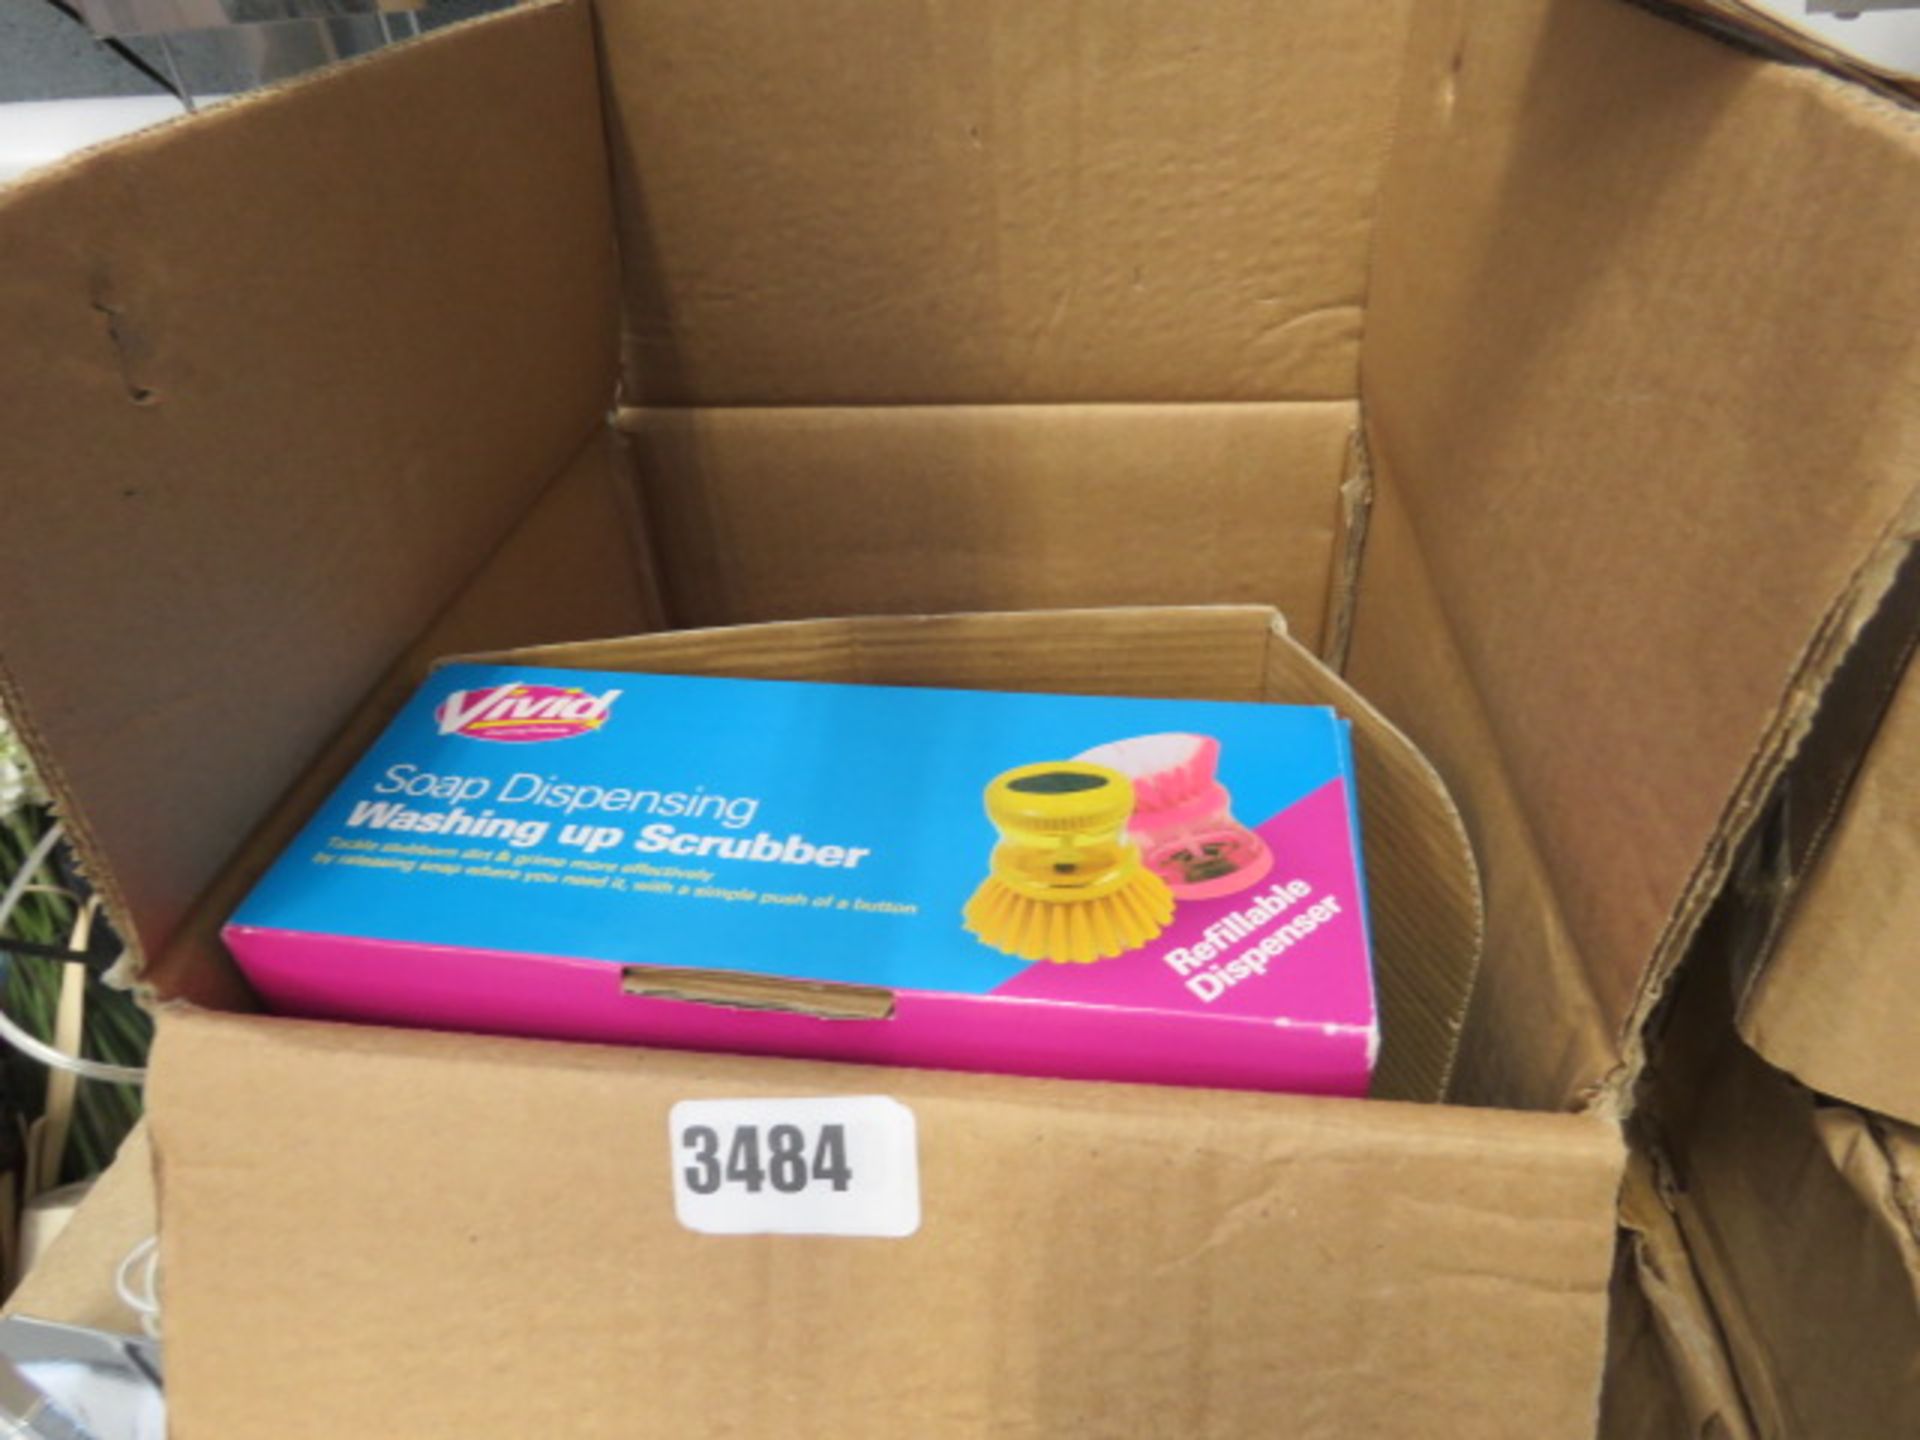 3380 Box containing soap dispenser, washing up scrubber etc